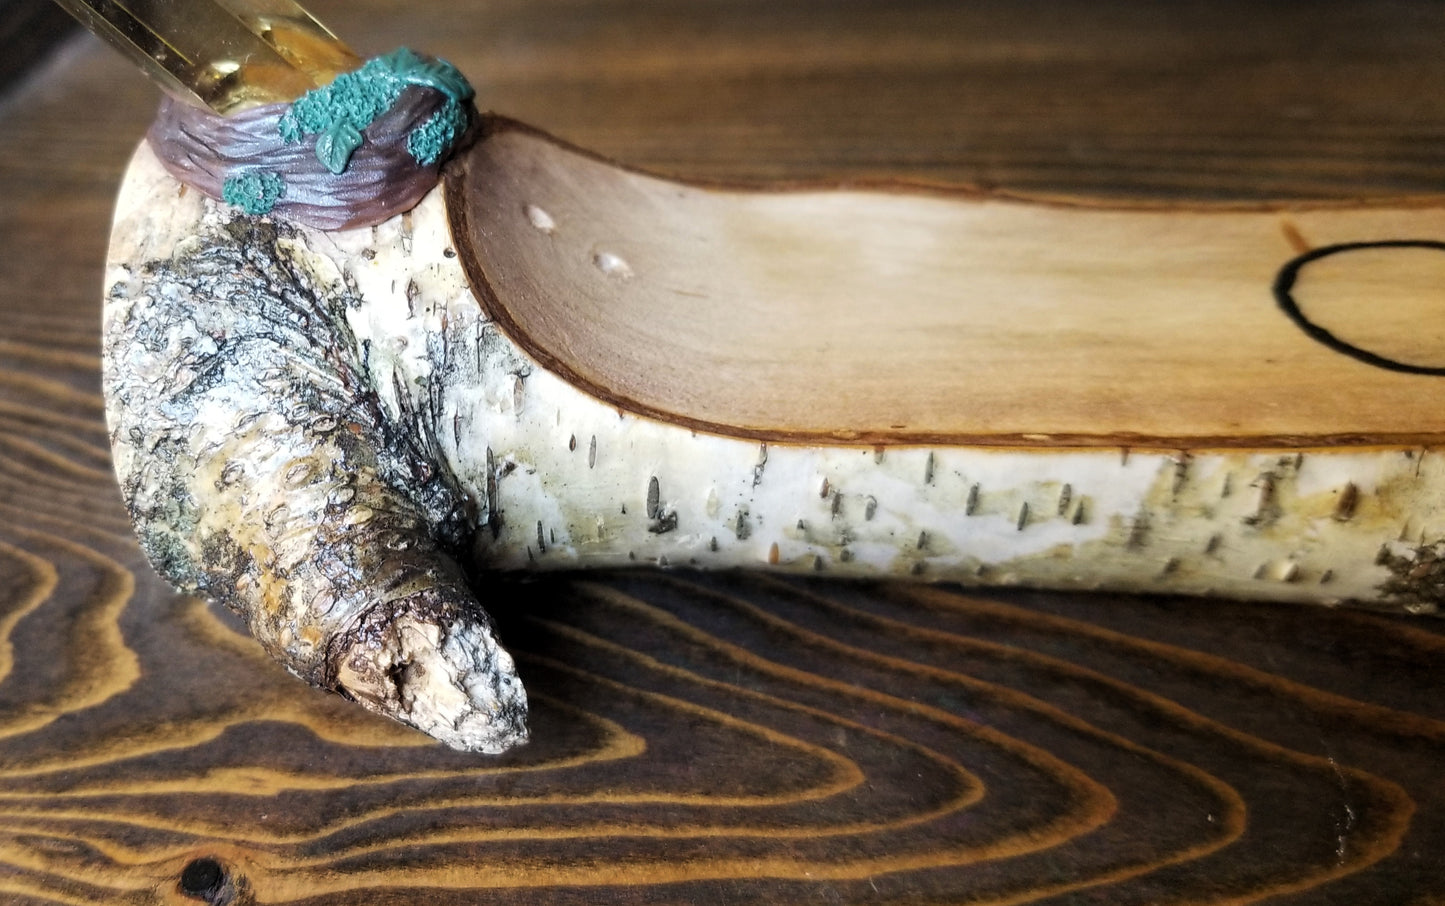 Elemental Incense Burner with Citrine and Turquoise Crystals